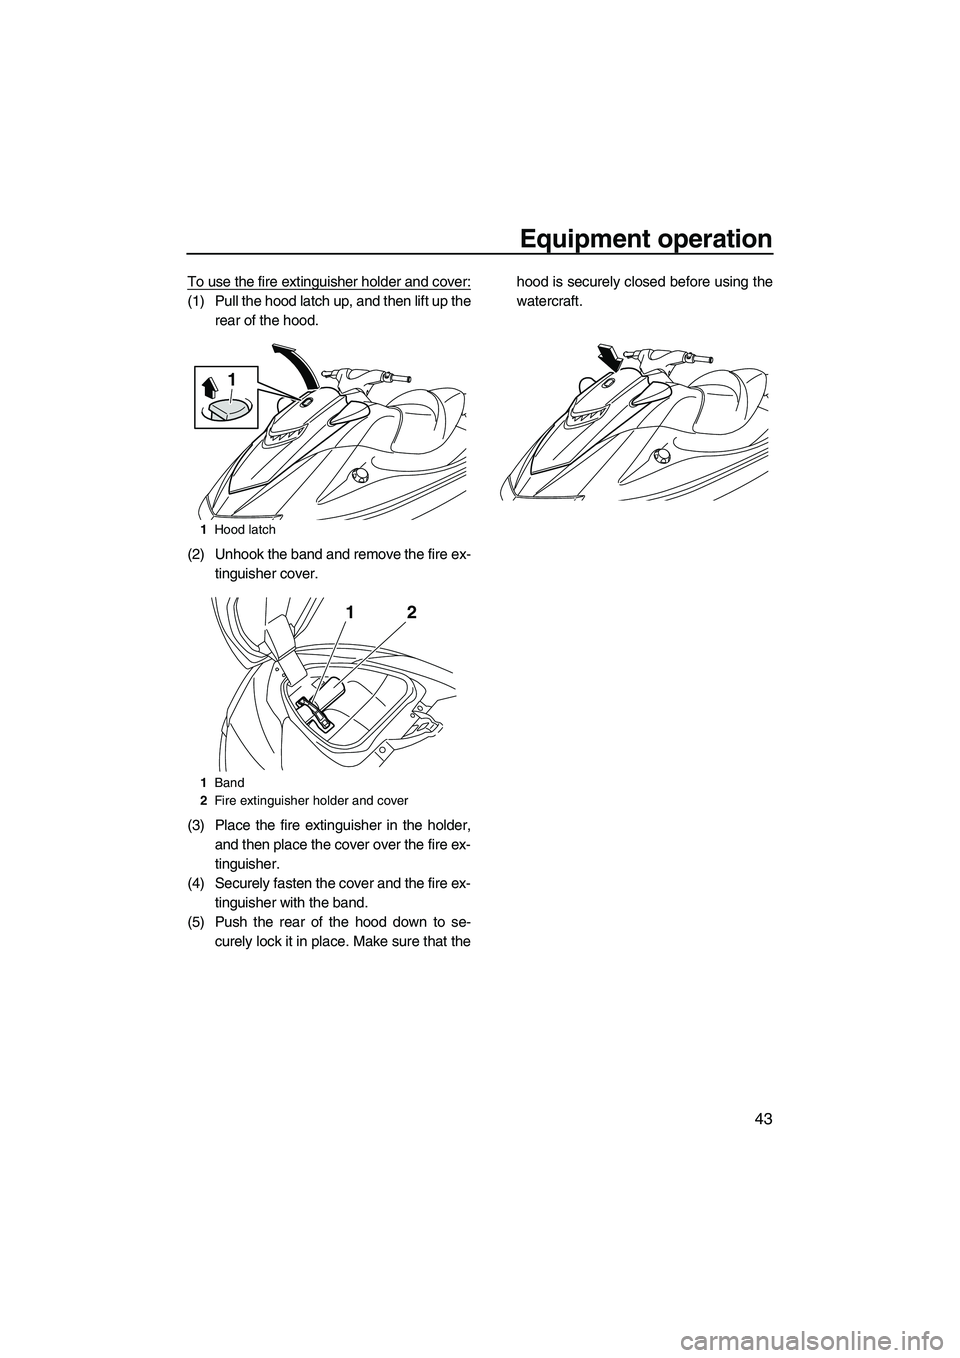 YAMAHA VXS 2012 Service Manual Equipment operation
43
To use the fire extinguisher holder and cover:
(1) Pull the hood latch up, and then lift up the
rear of the hood.
(2) Unhook the band and remove the fire ex-
tinguisher cover.
(